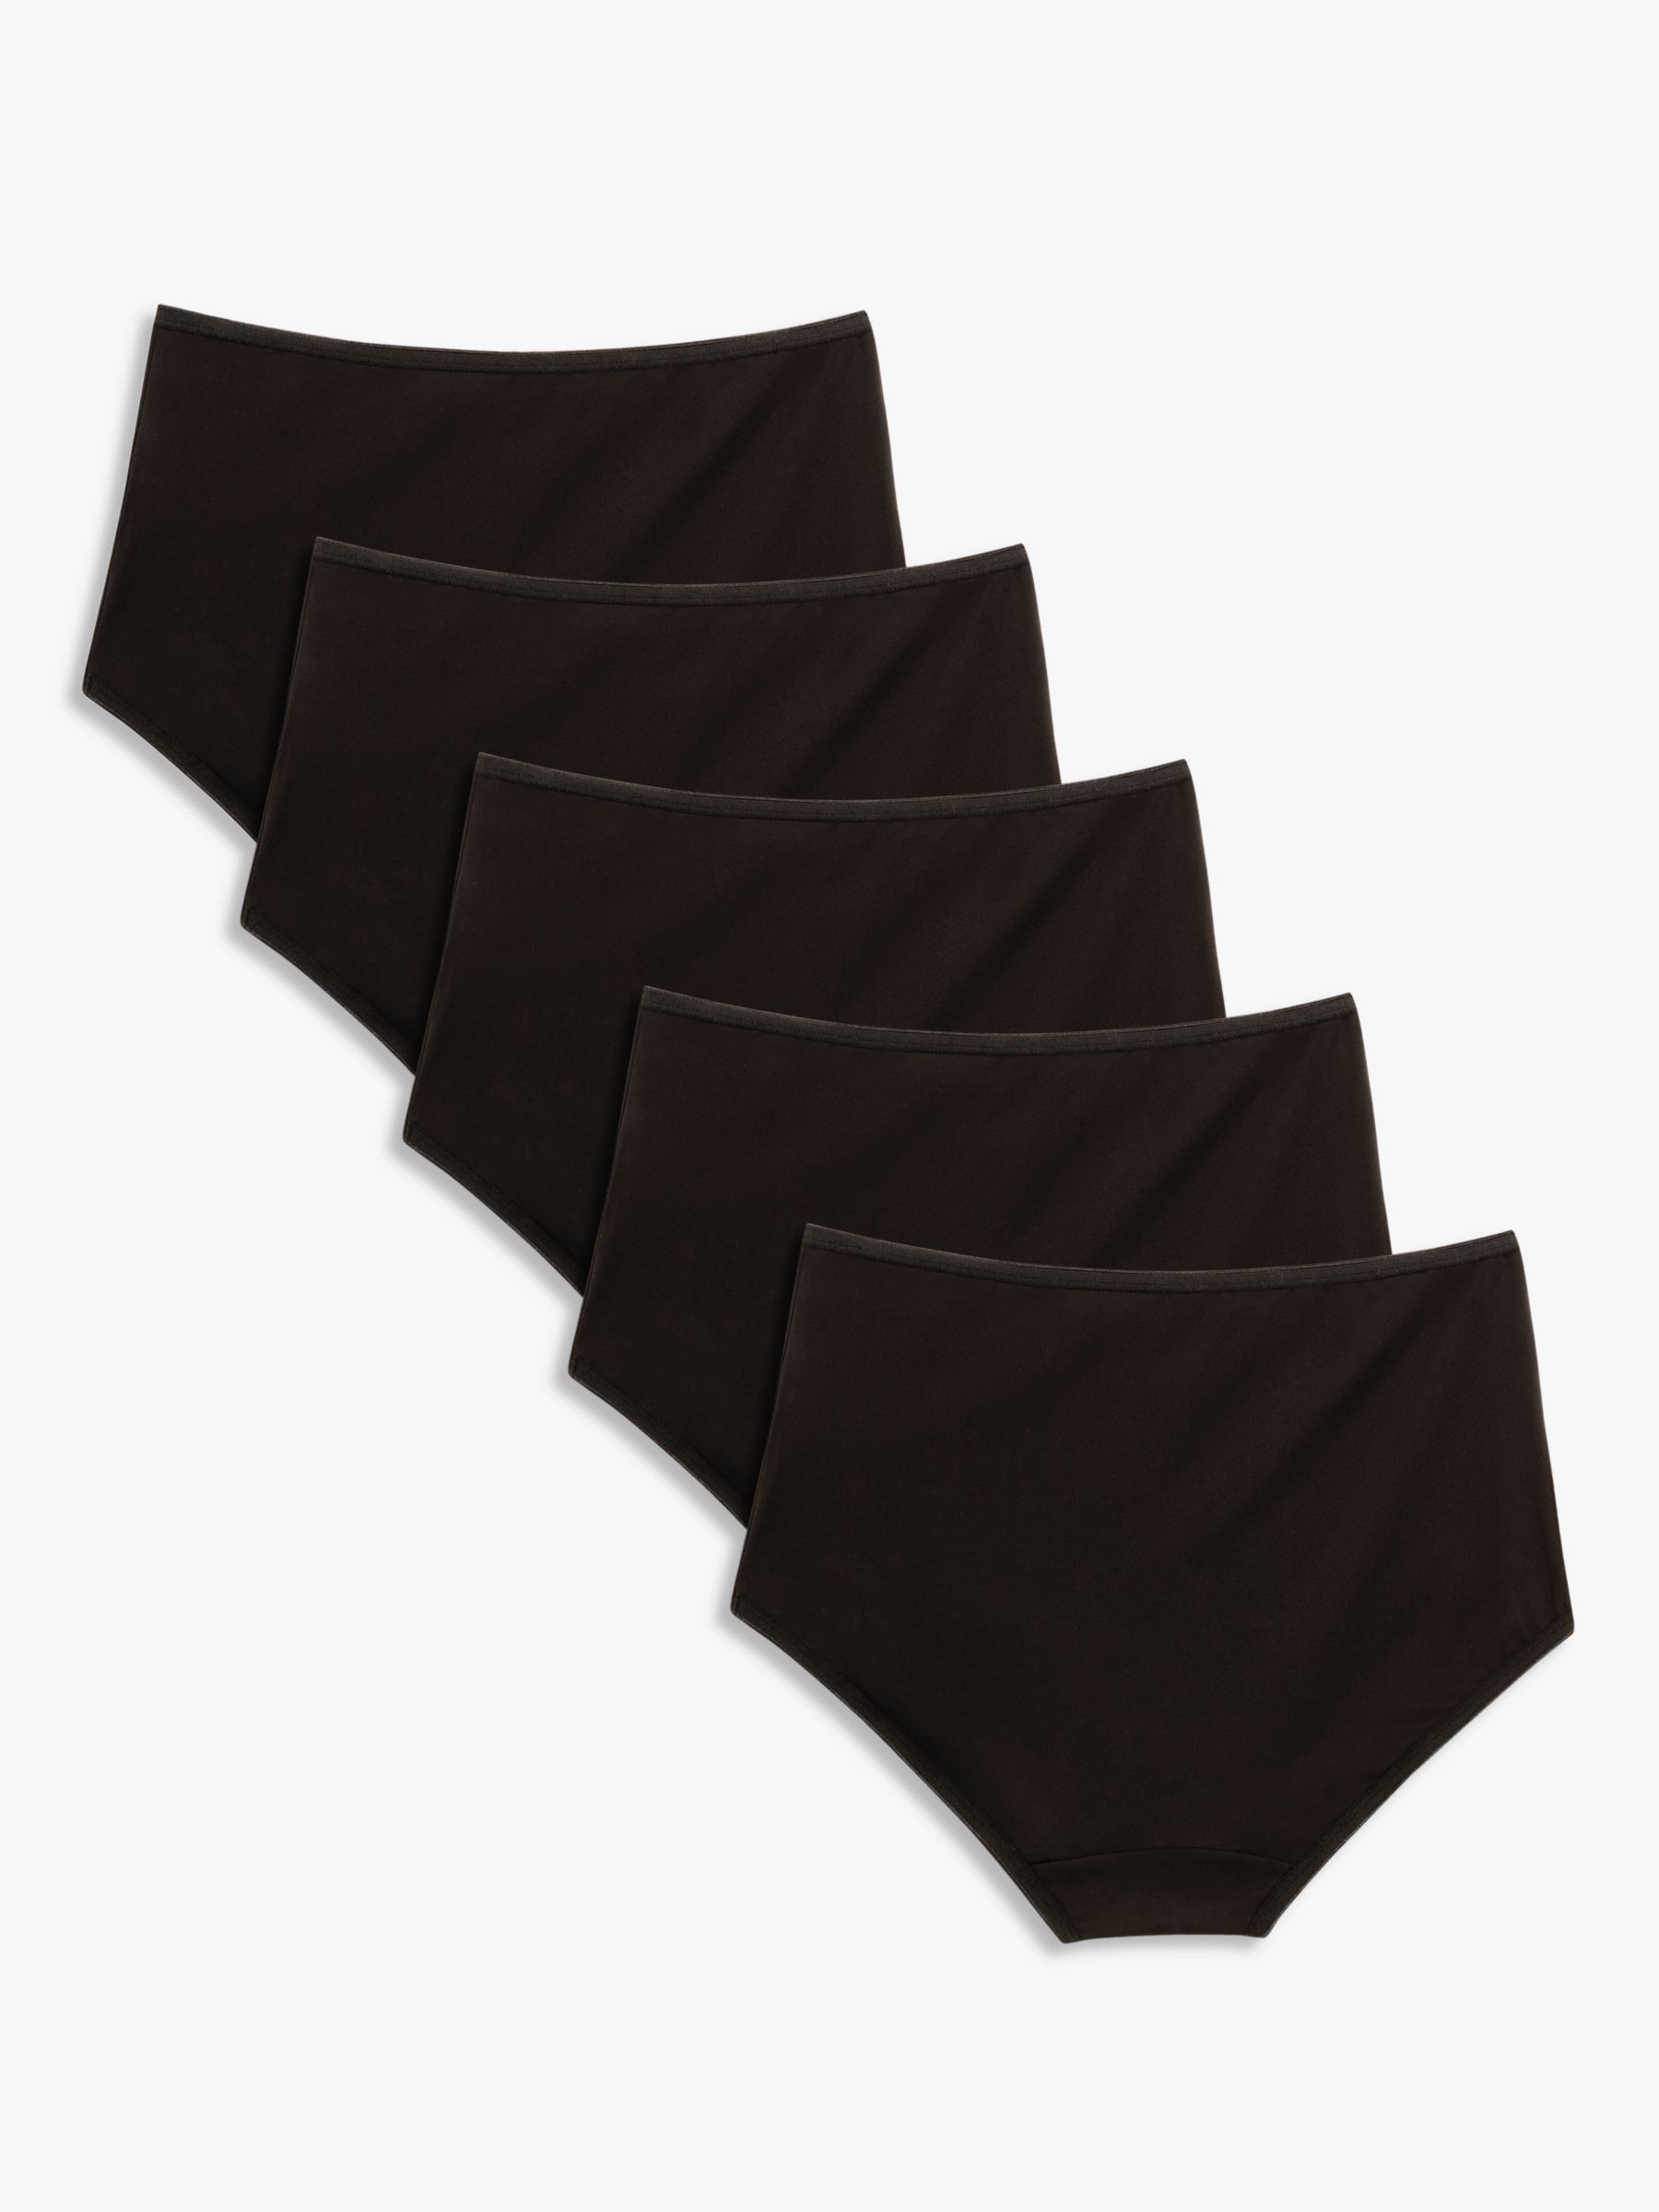 Buy John Lewis ANYDAY Microfibre Full Briefs, Pack of 5 Online at johnlewis.com